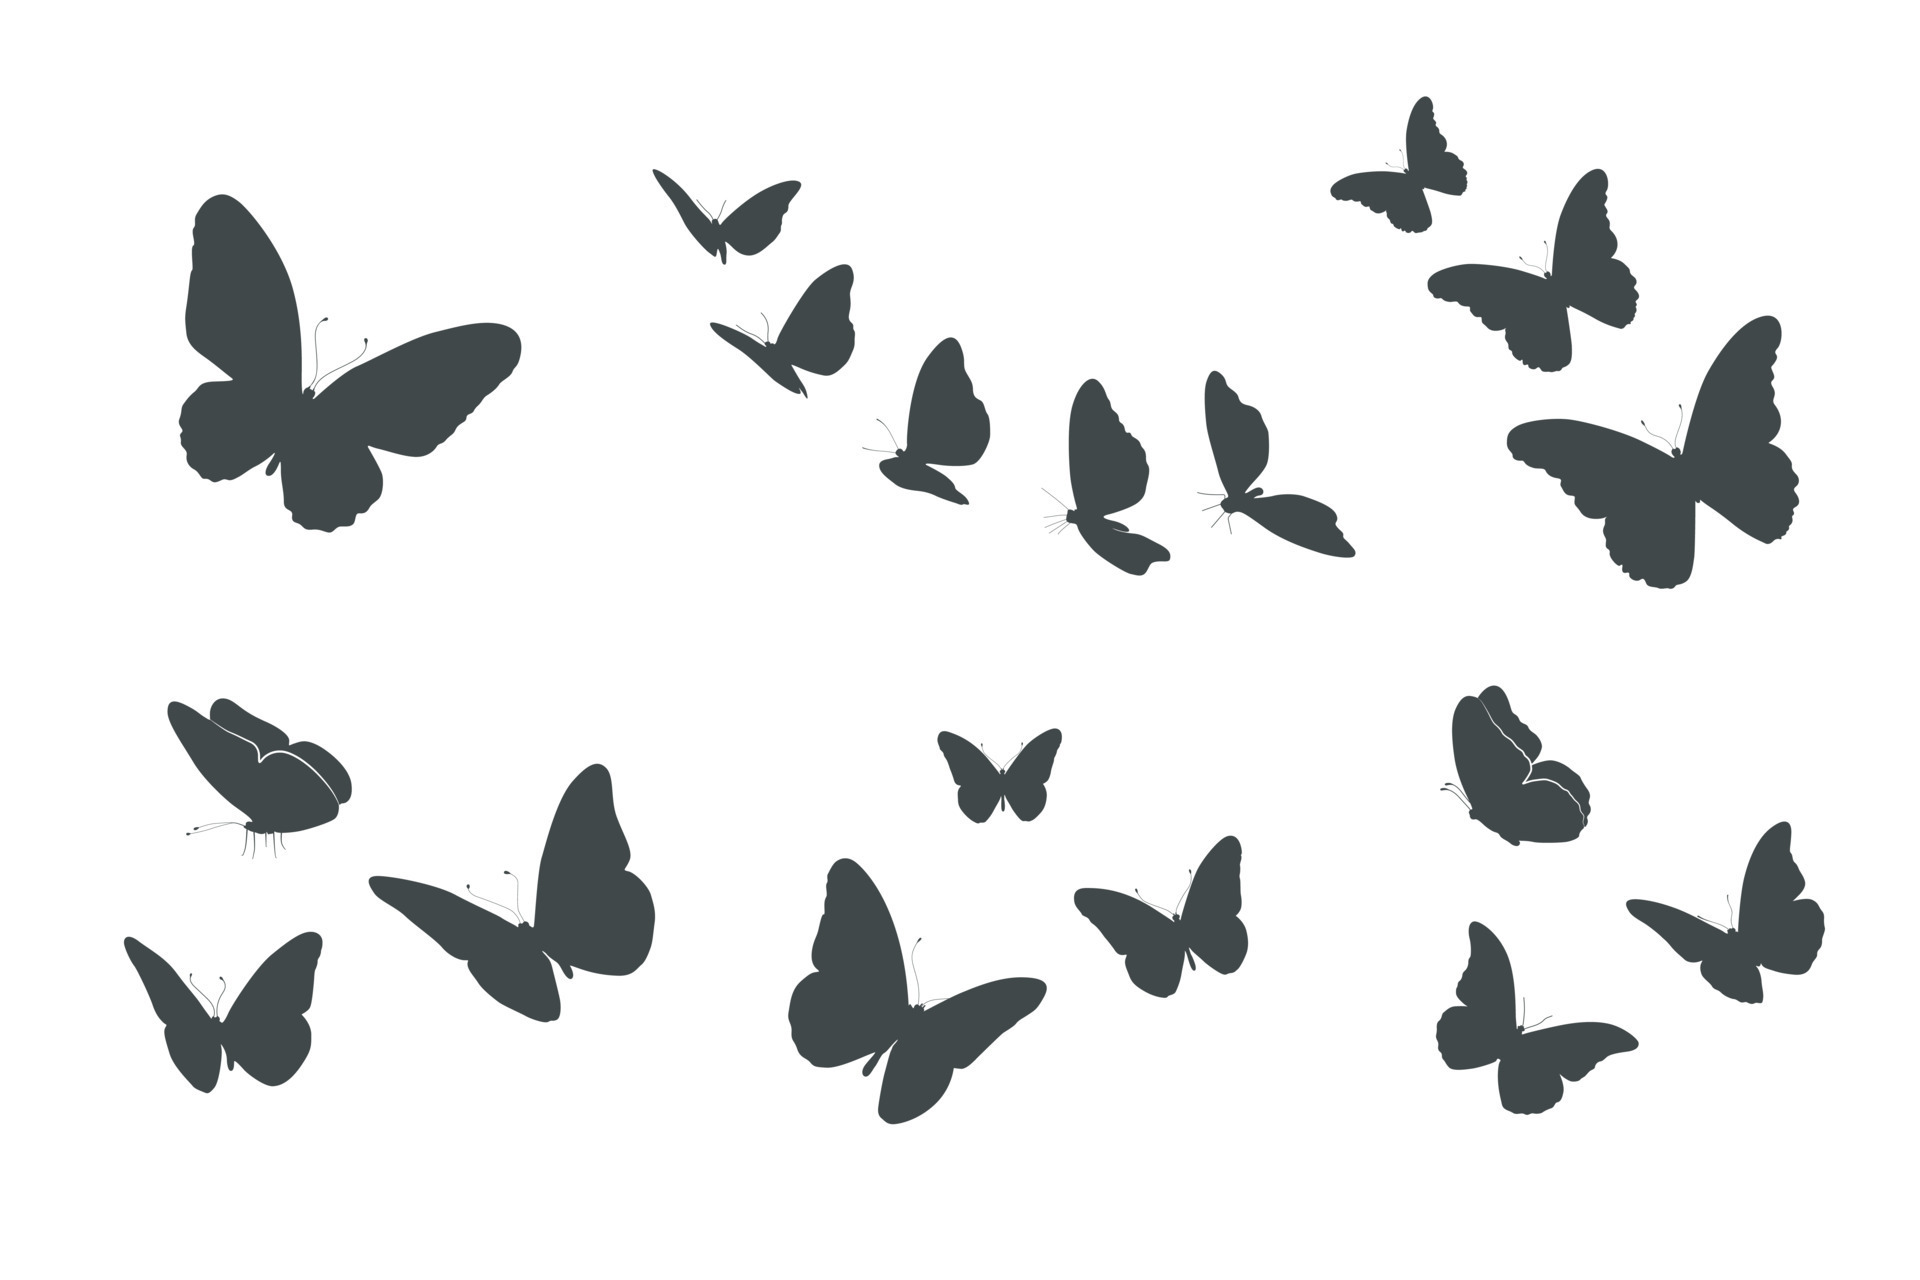 https://static.vecteezy.com/system/resources/previews/016/827/542/original/flying-butterfly-silhouettes-butterflies-silhouettes-vector.jpg